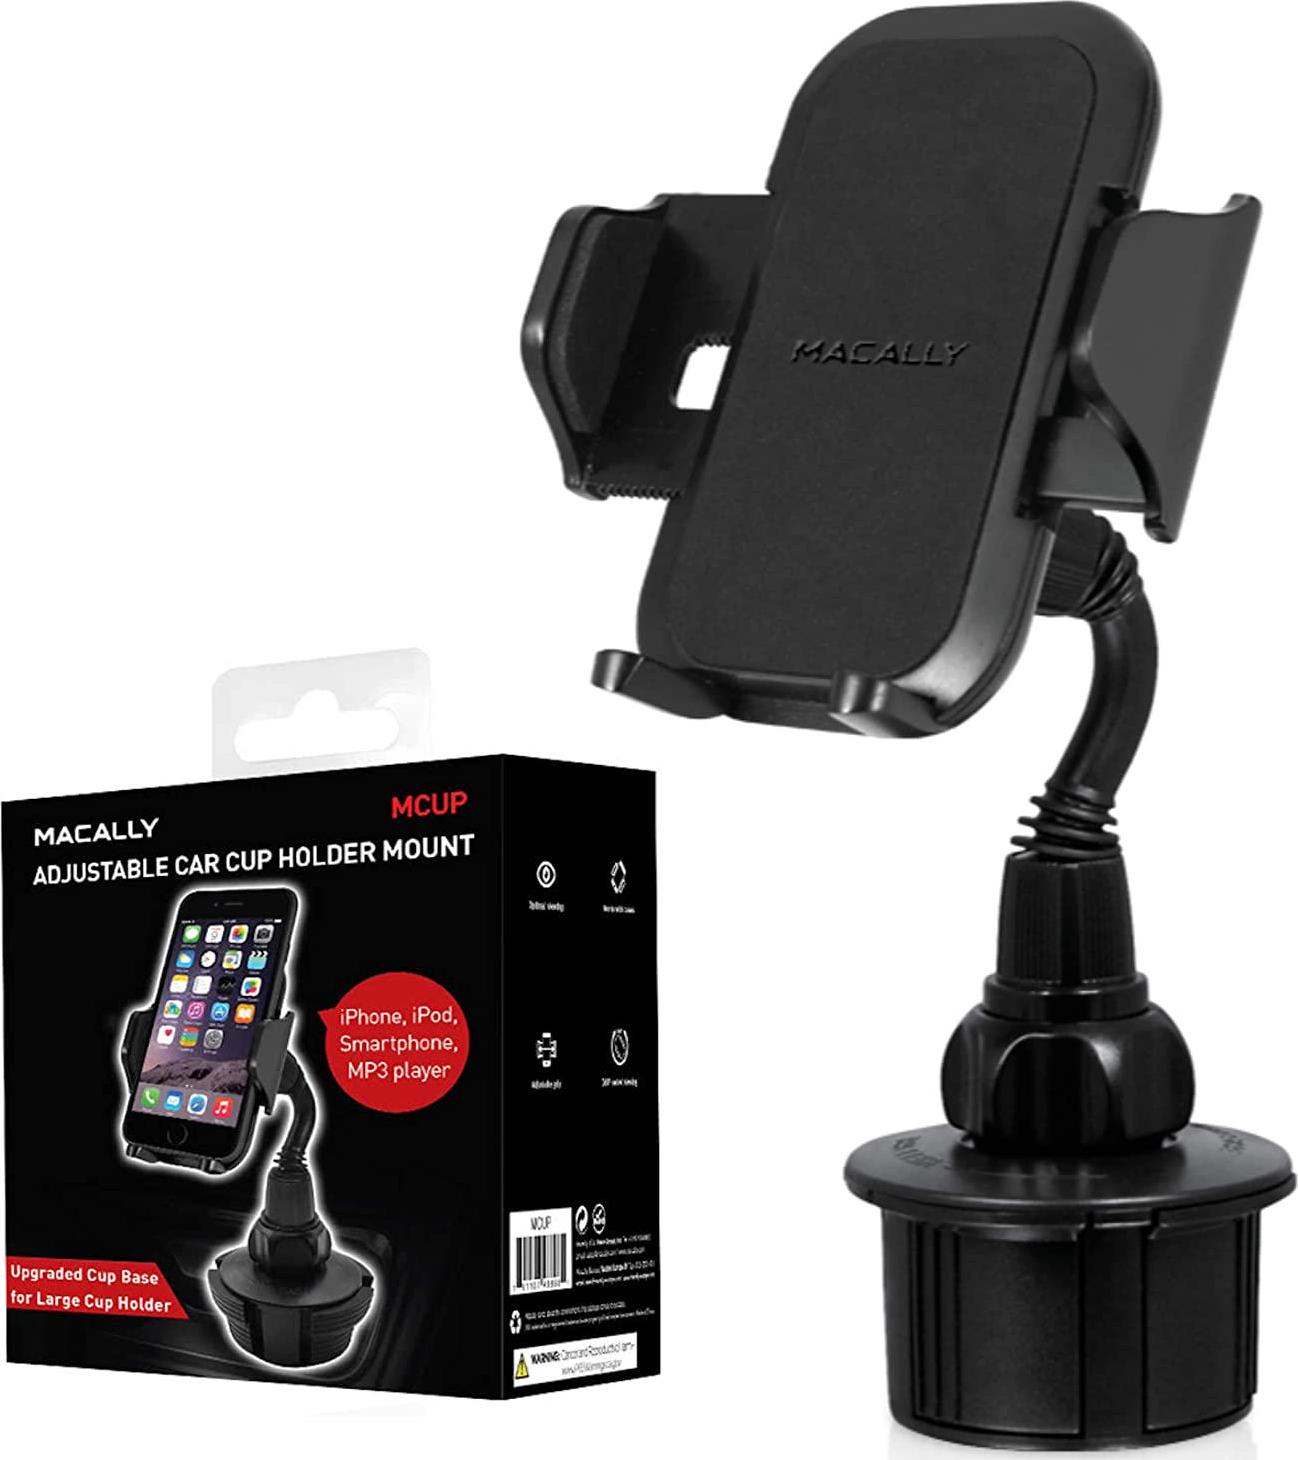 Macally, Macally Adjustable Car Cup Holder Mount for iPhone, Samsung, Smartphones, iPod, MP3, GPS, etc. (MCUP)